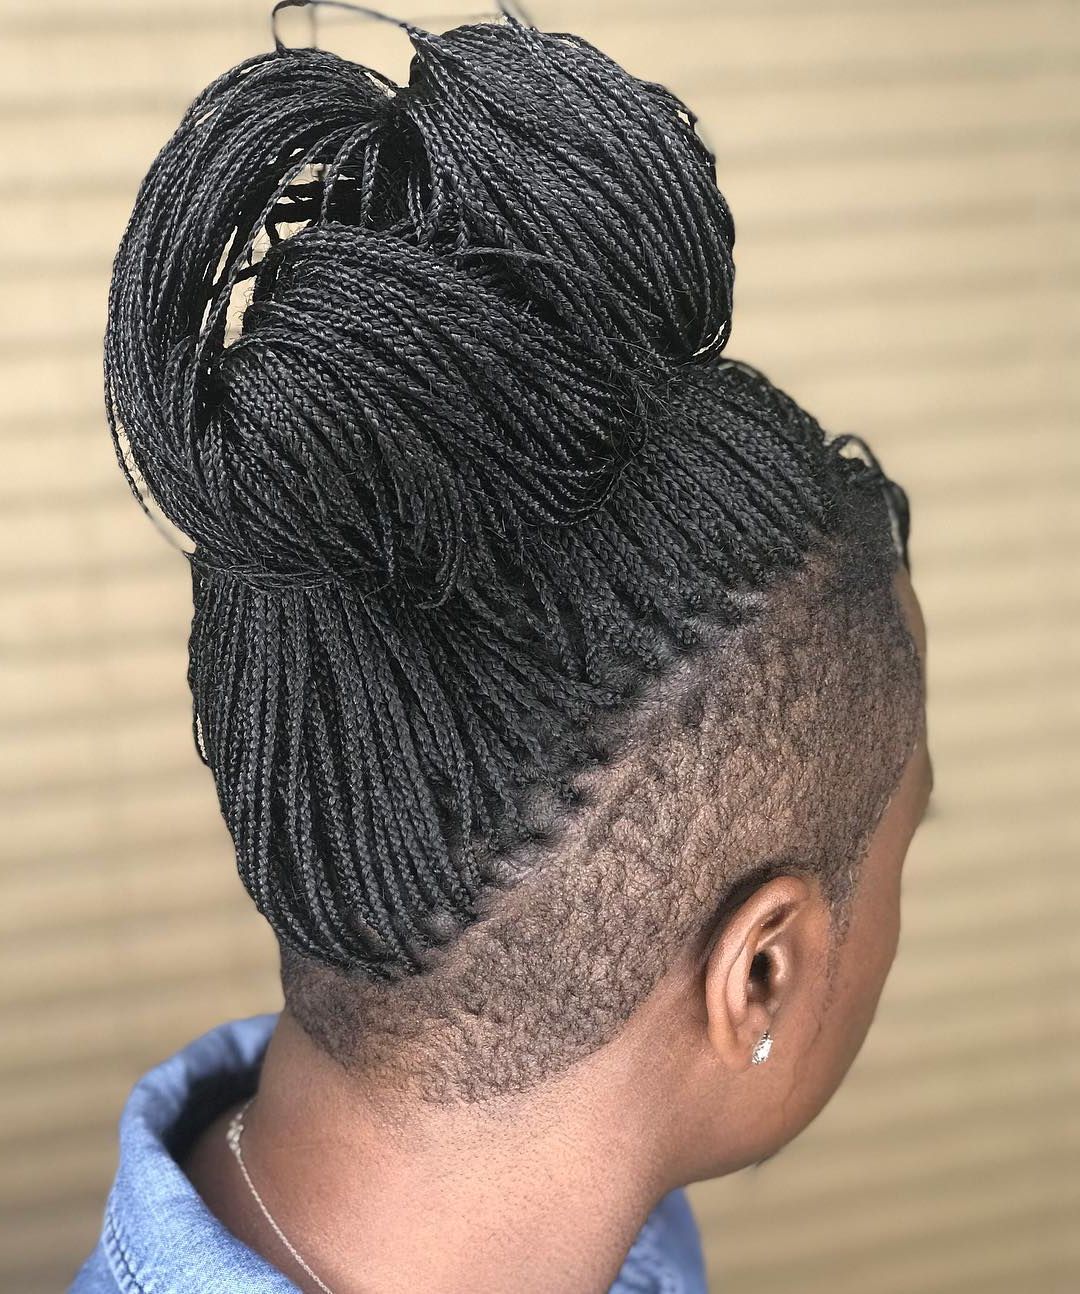 20 Superb Braids With Shaved Sides Worth Copying Pertaining To Recent Black Twists Micro Braids With Golden Highlights (View 20 of 20)